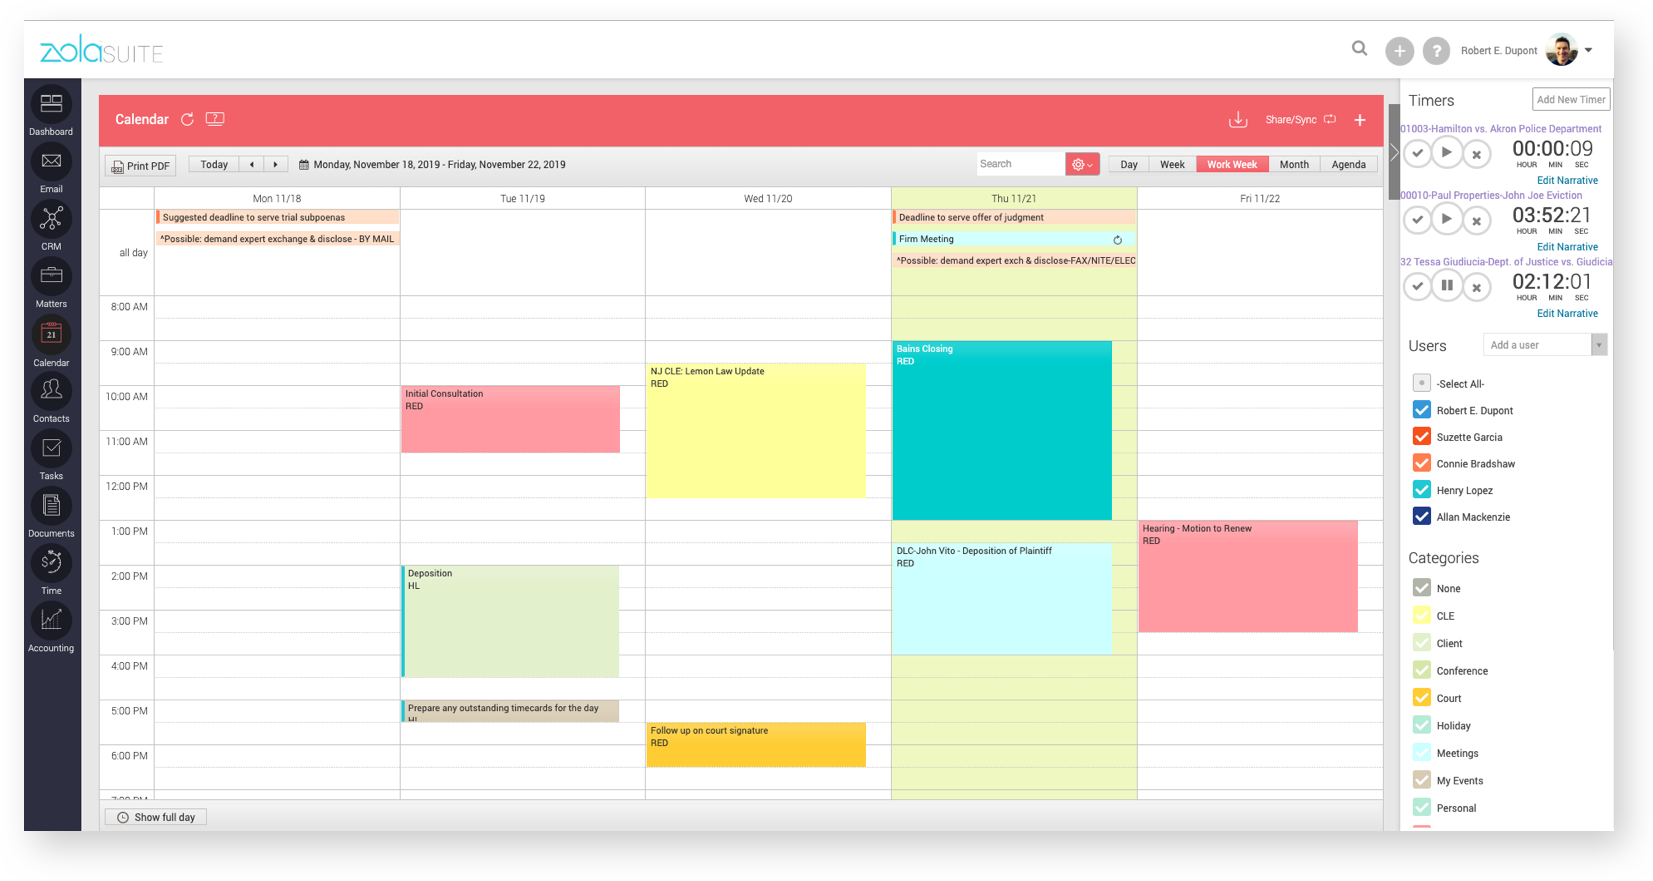 CARET Legal Software - Case-centric and rules-based calendaring so you never miss an important deadline